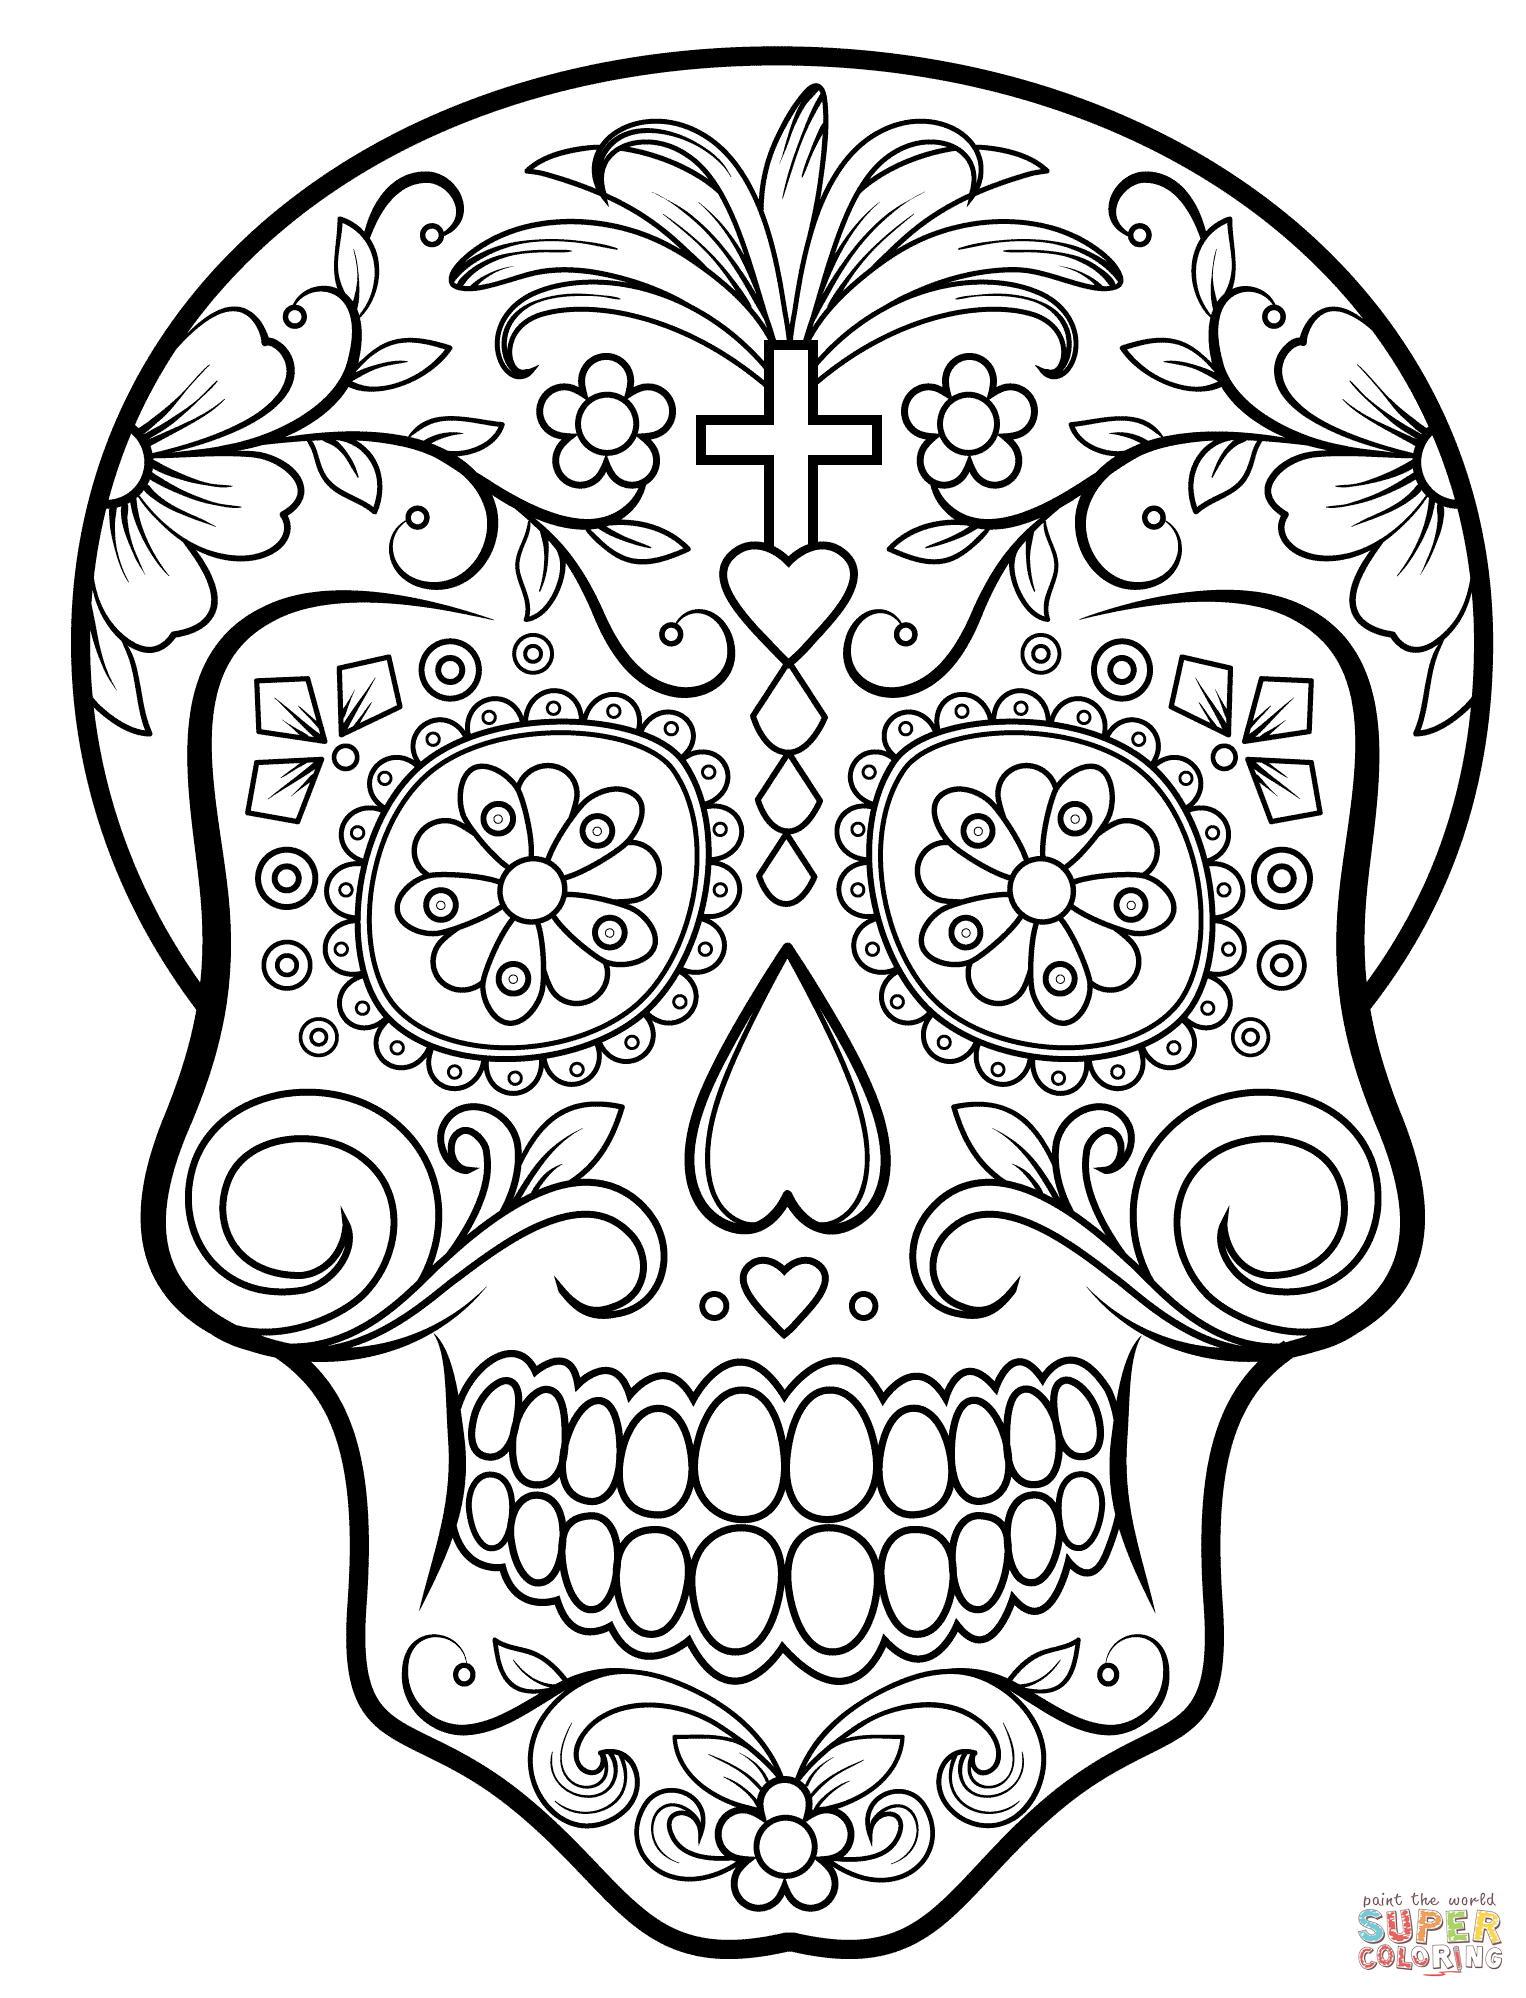 Sugar Skull Coloring Page | Free Printable Coloring Pages - Free Printable Day Of The Dead Coloring Pages